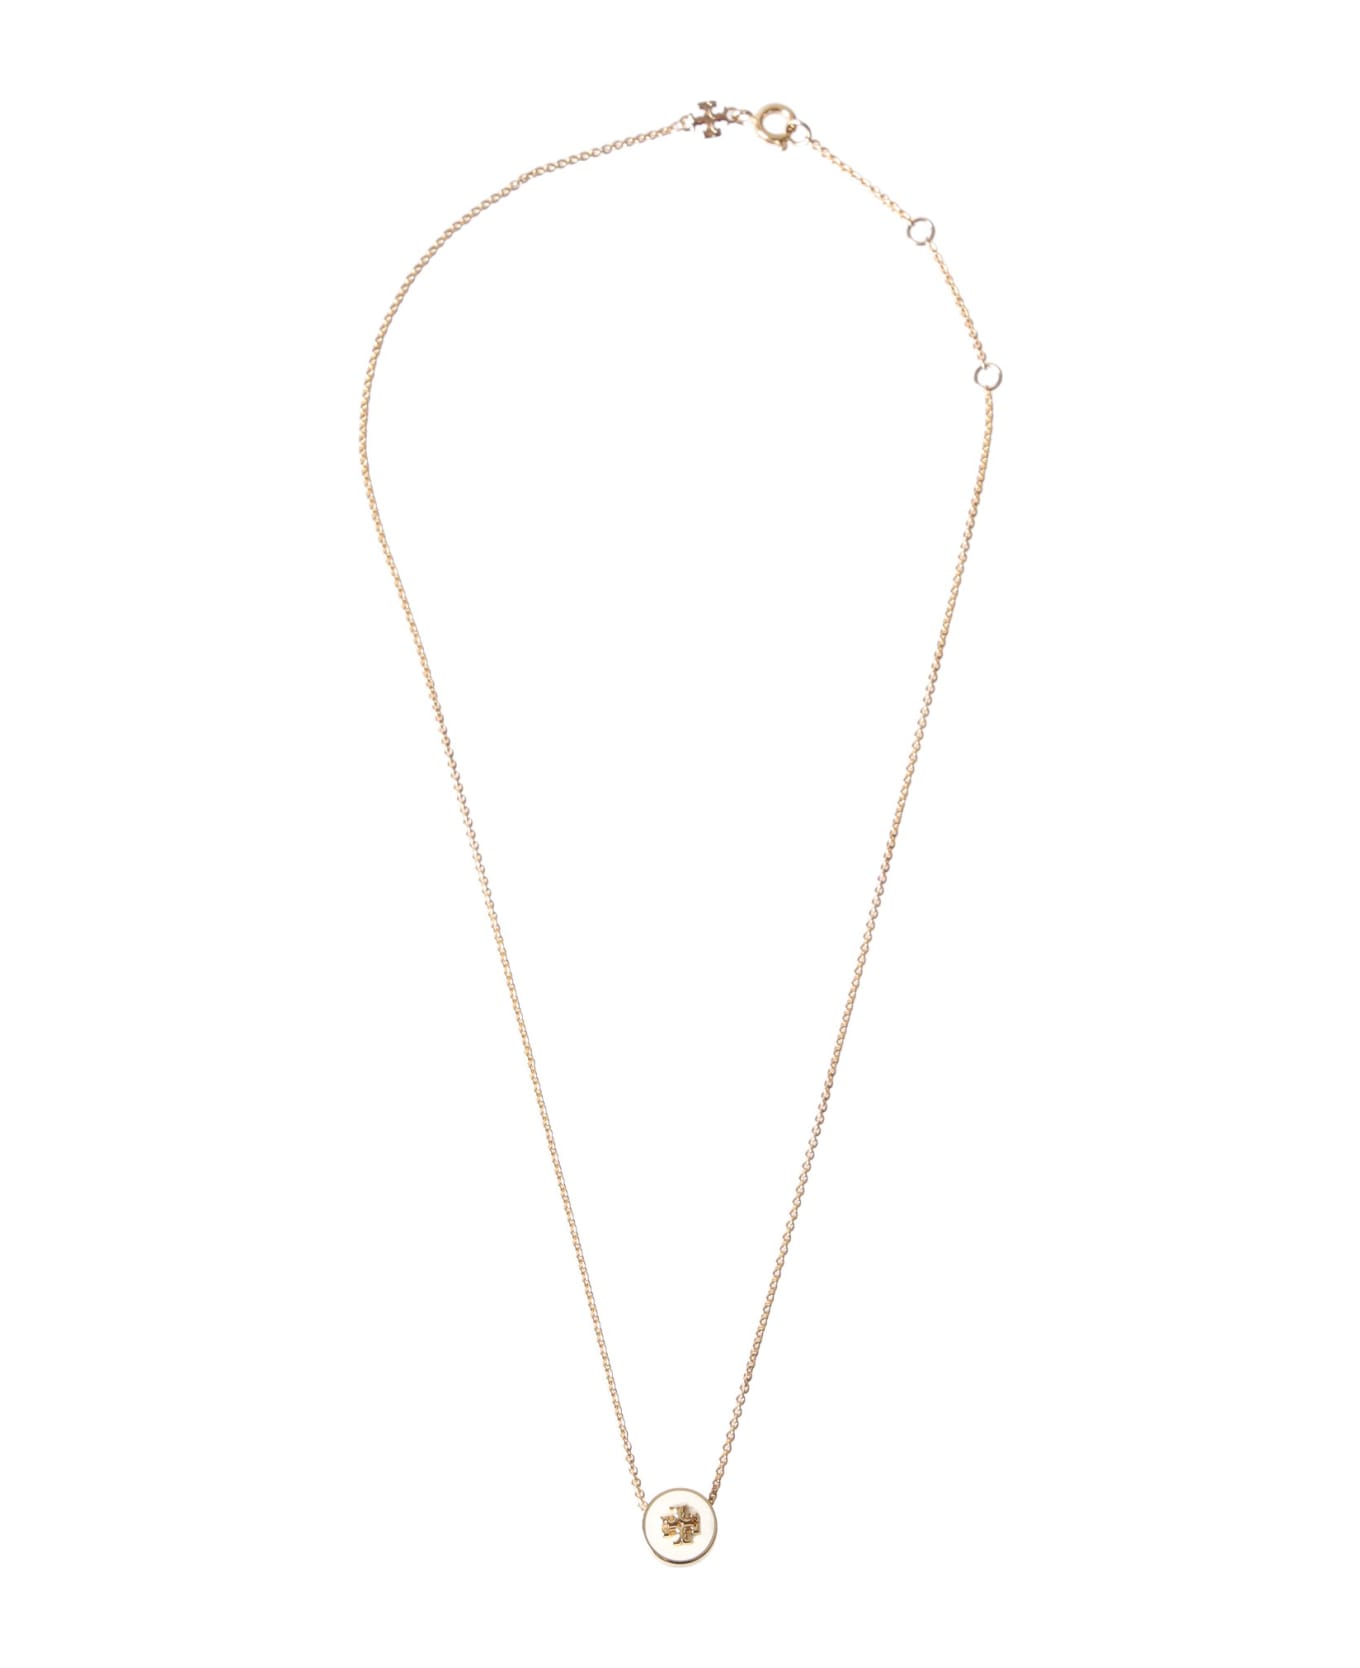 Tory Burch Necklace With Logo Pendant - Gold ネックレス